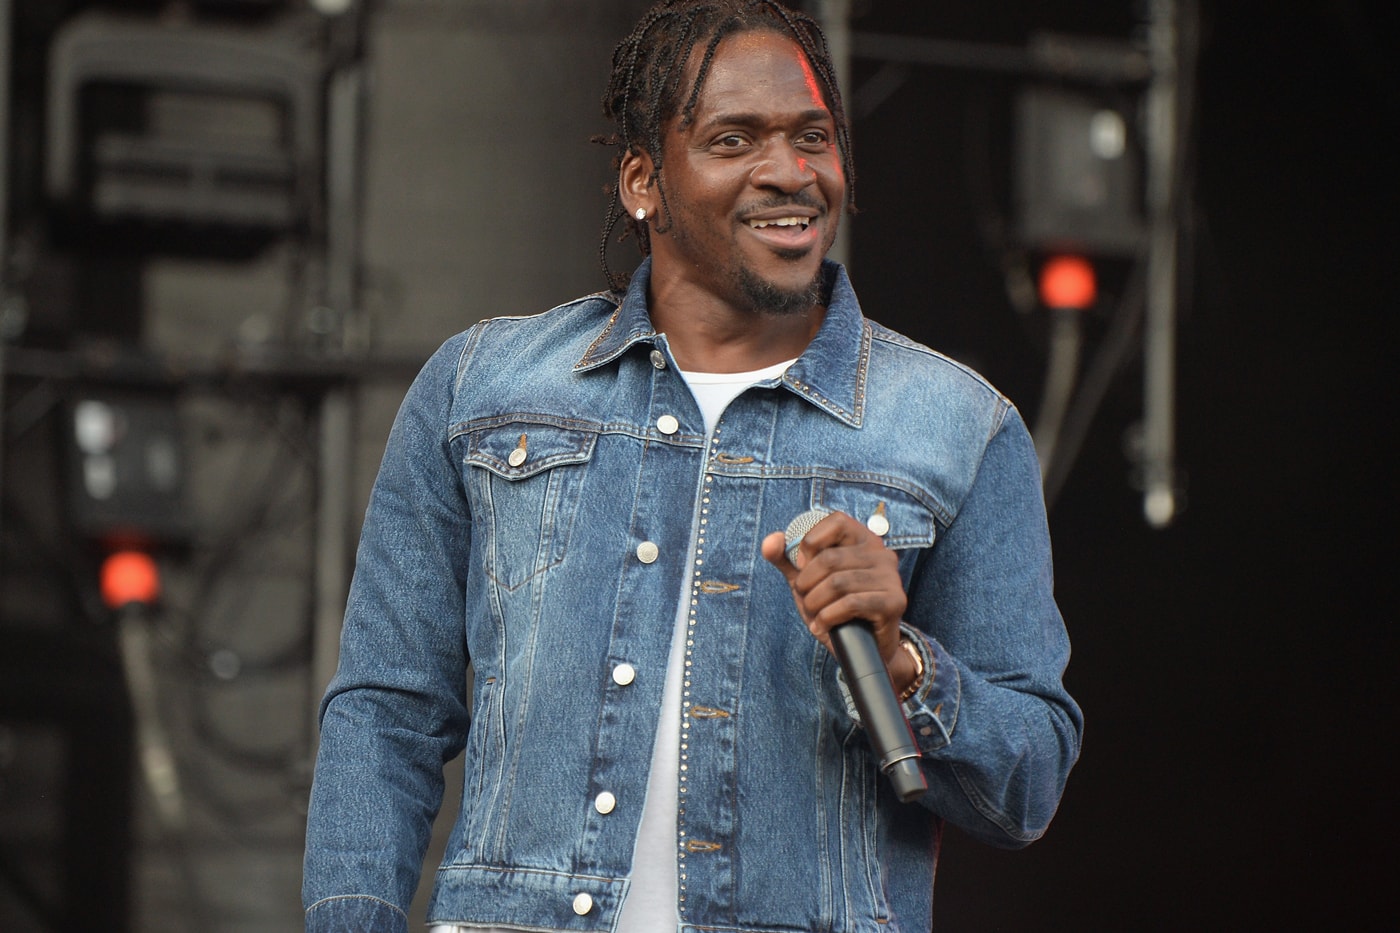 Pusha T and Jay Z to Release New 'King Push' Single "Drug Dealers Anonymous" Very Soon